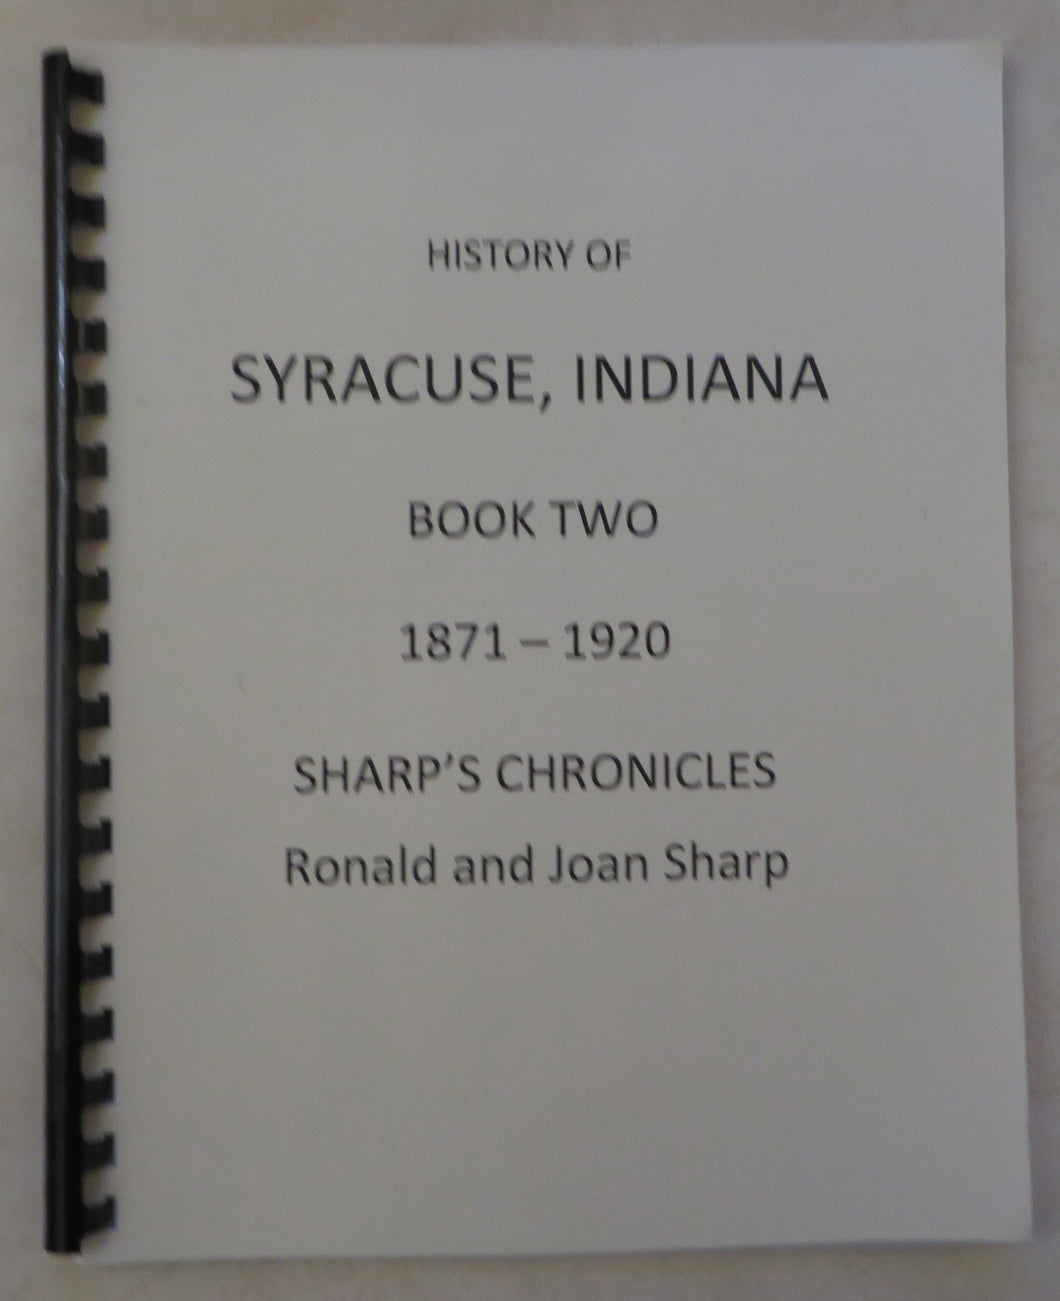 History of Syracuse, Indiana - Book Two - 1871-1920